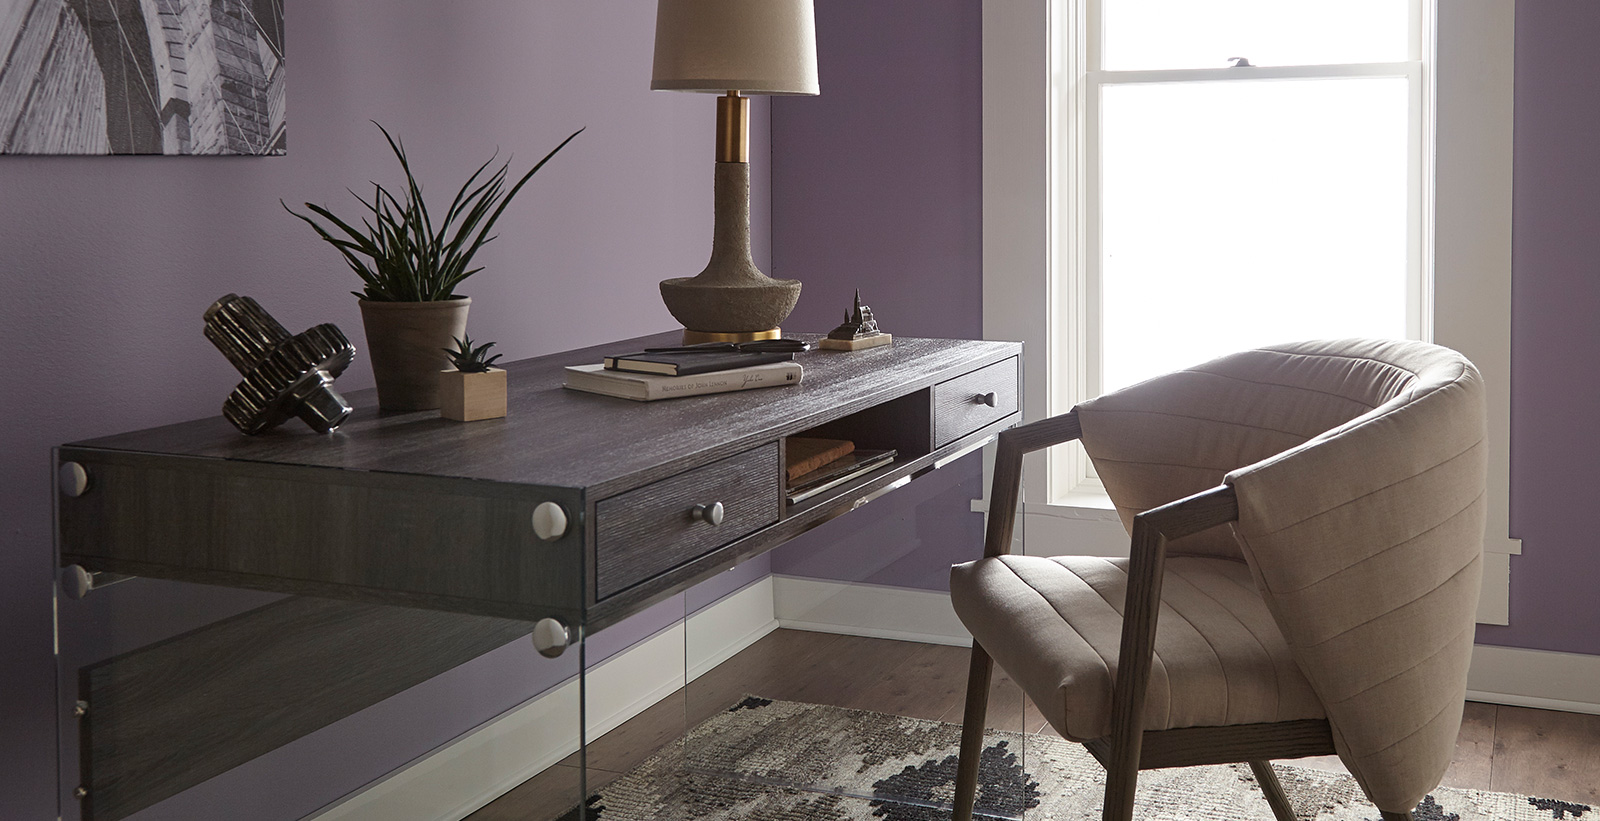 Office workspace with purple walls and white trim, wooden desk, relaxed and calming style.